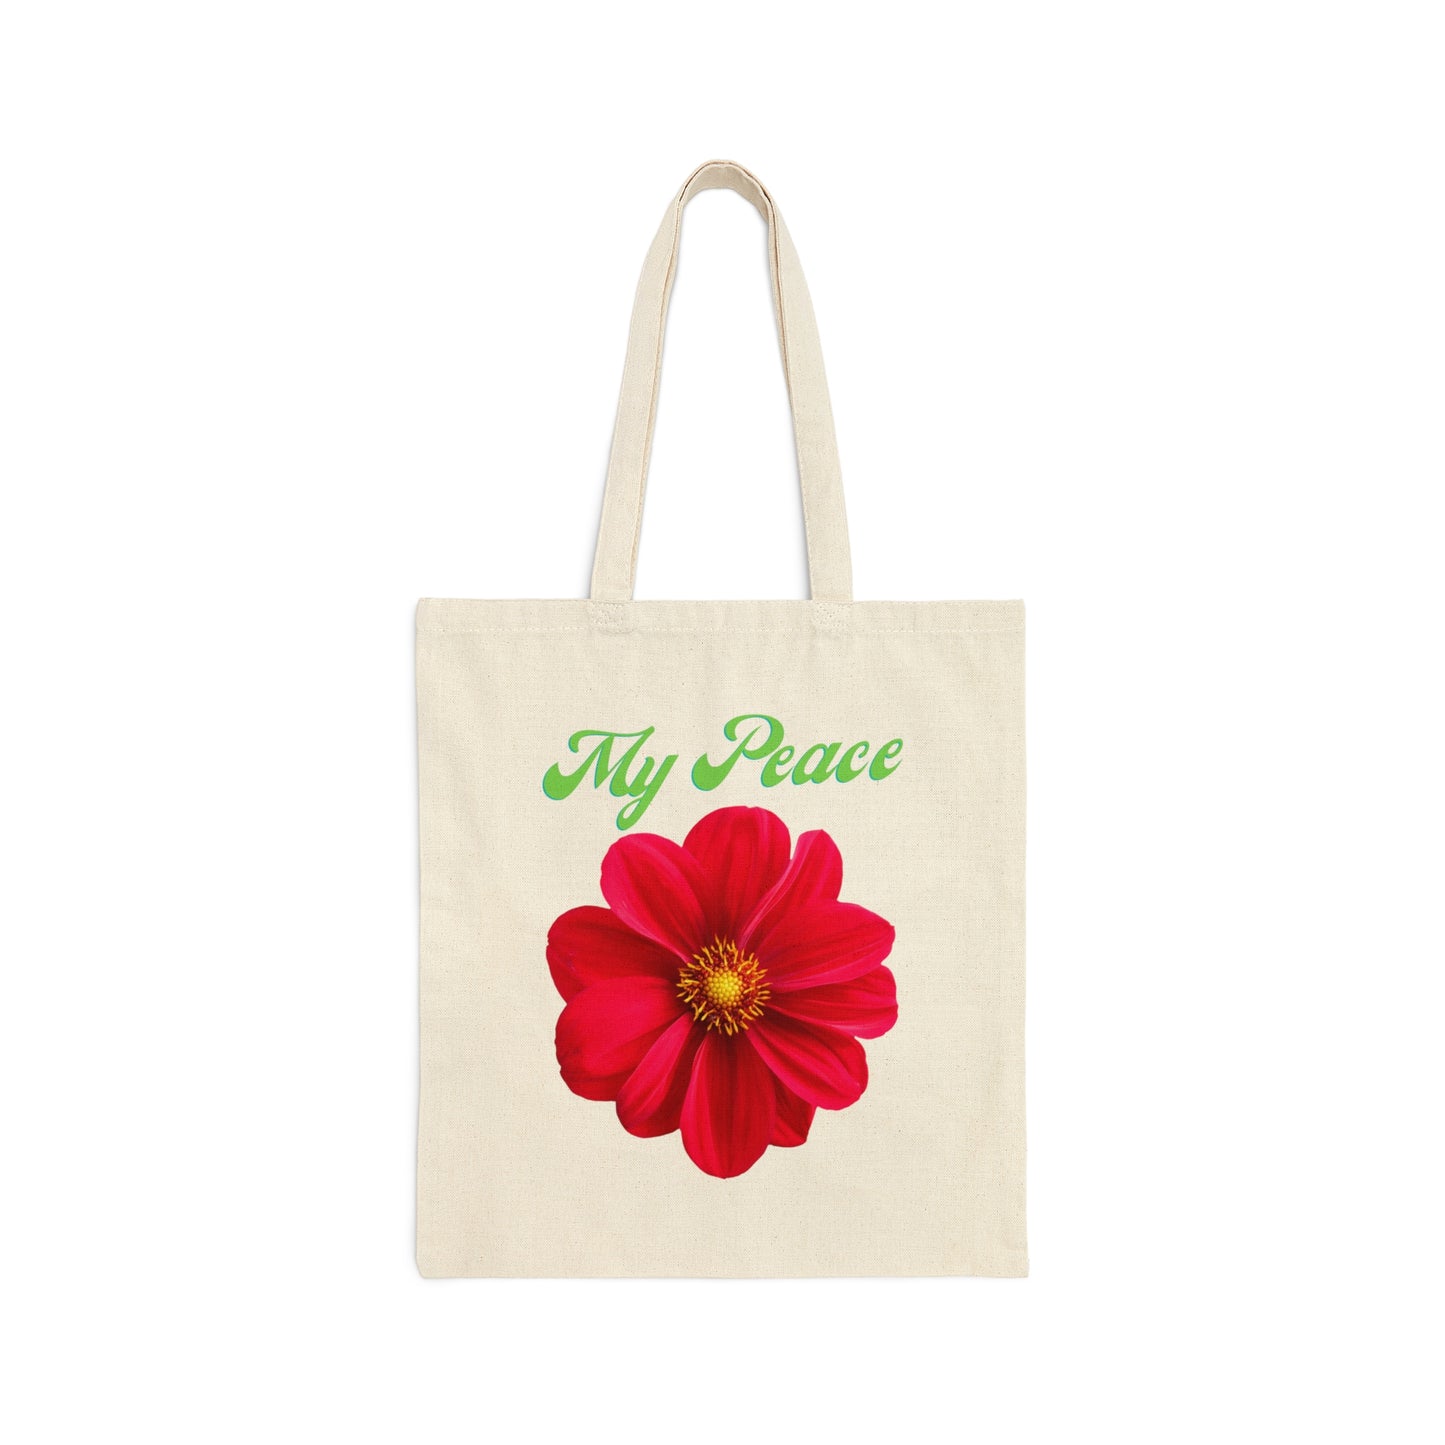 Red Flower Design Cotton Canvas Tote Bag